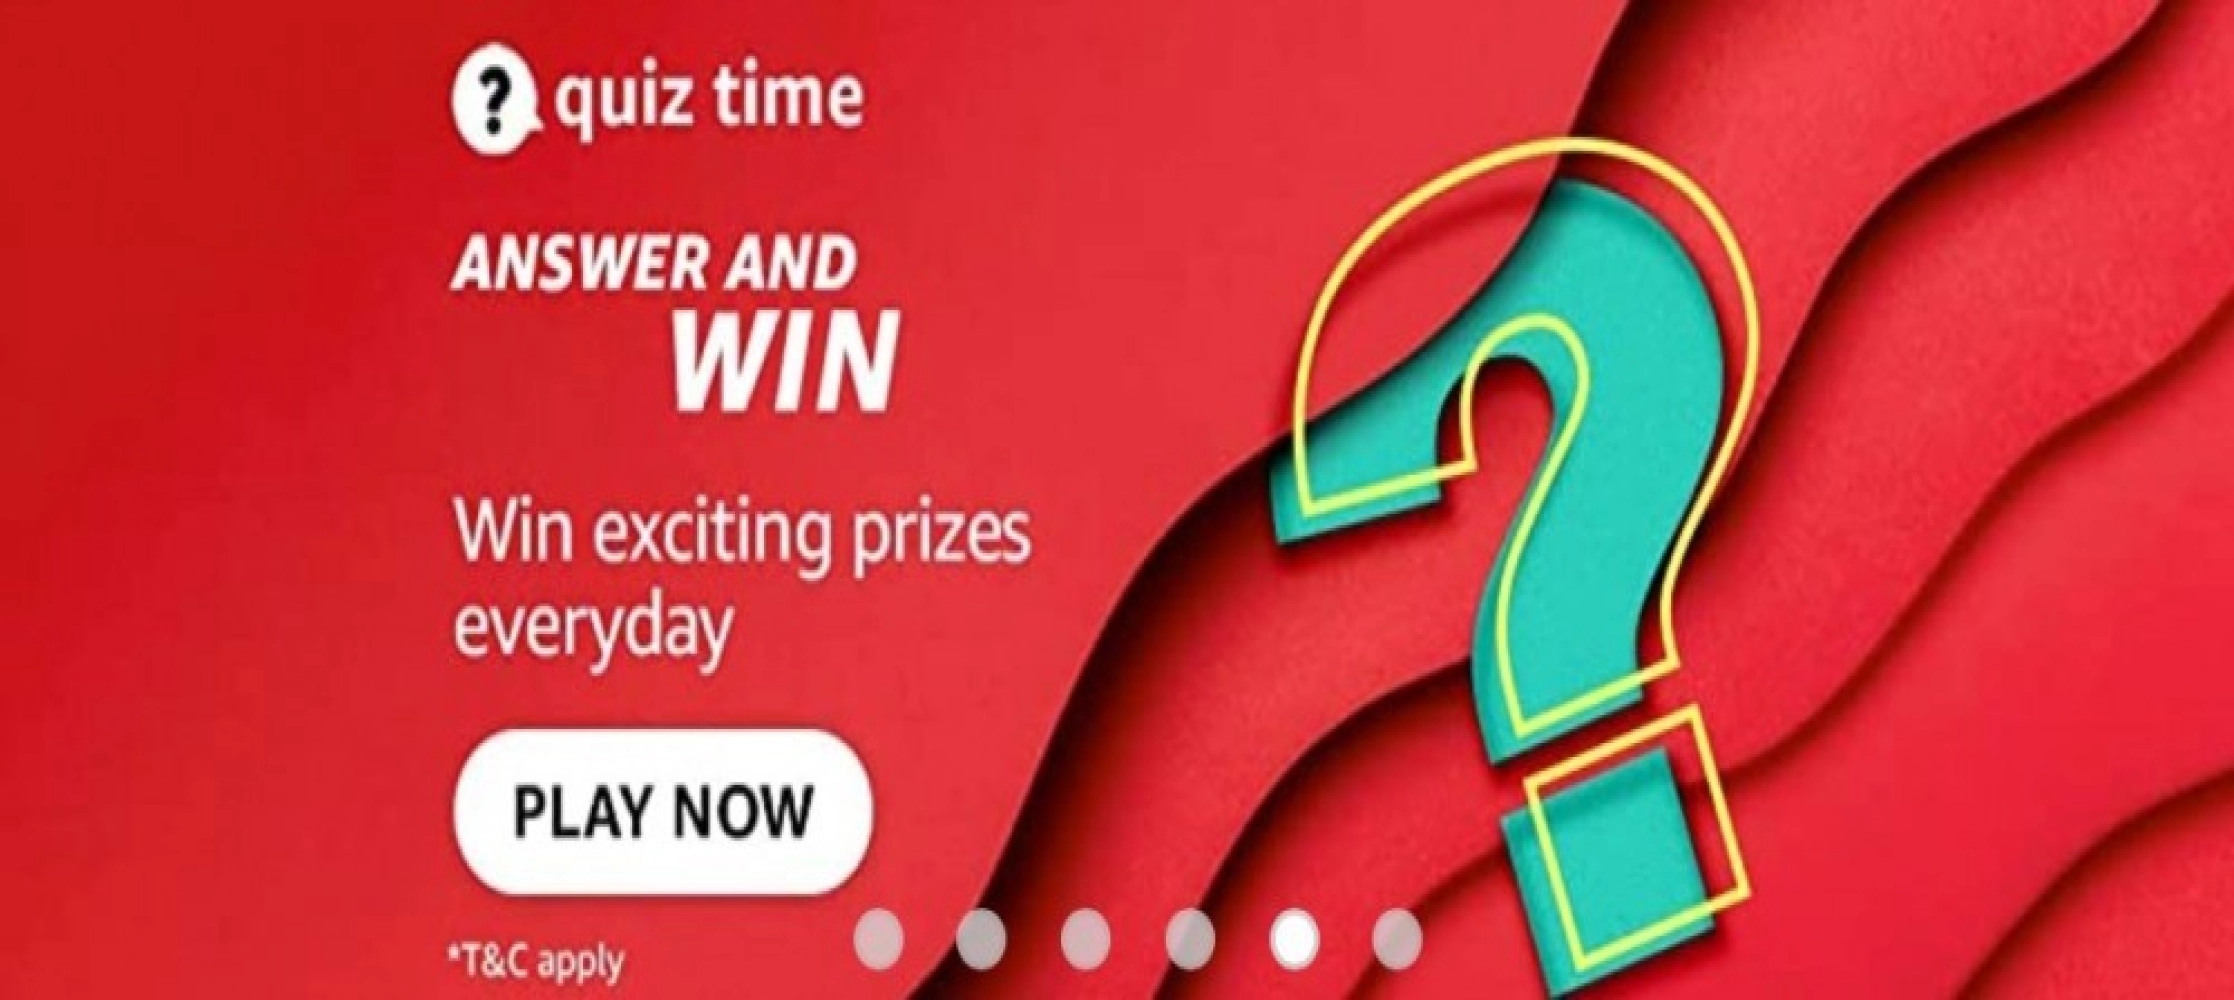 AMAZON QUIZ CONTEST: 10 MAY, 2022 - ANSWER TODAY FOR THE QUESTIONS AND GET A CHANCE TO WIN AMAZON PAY RS.5,000